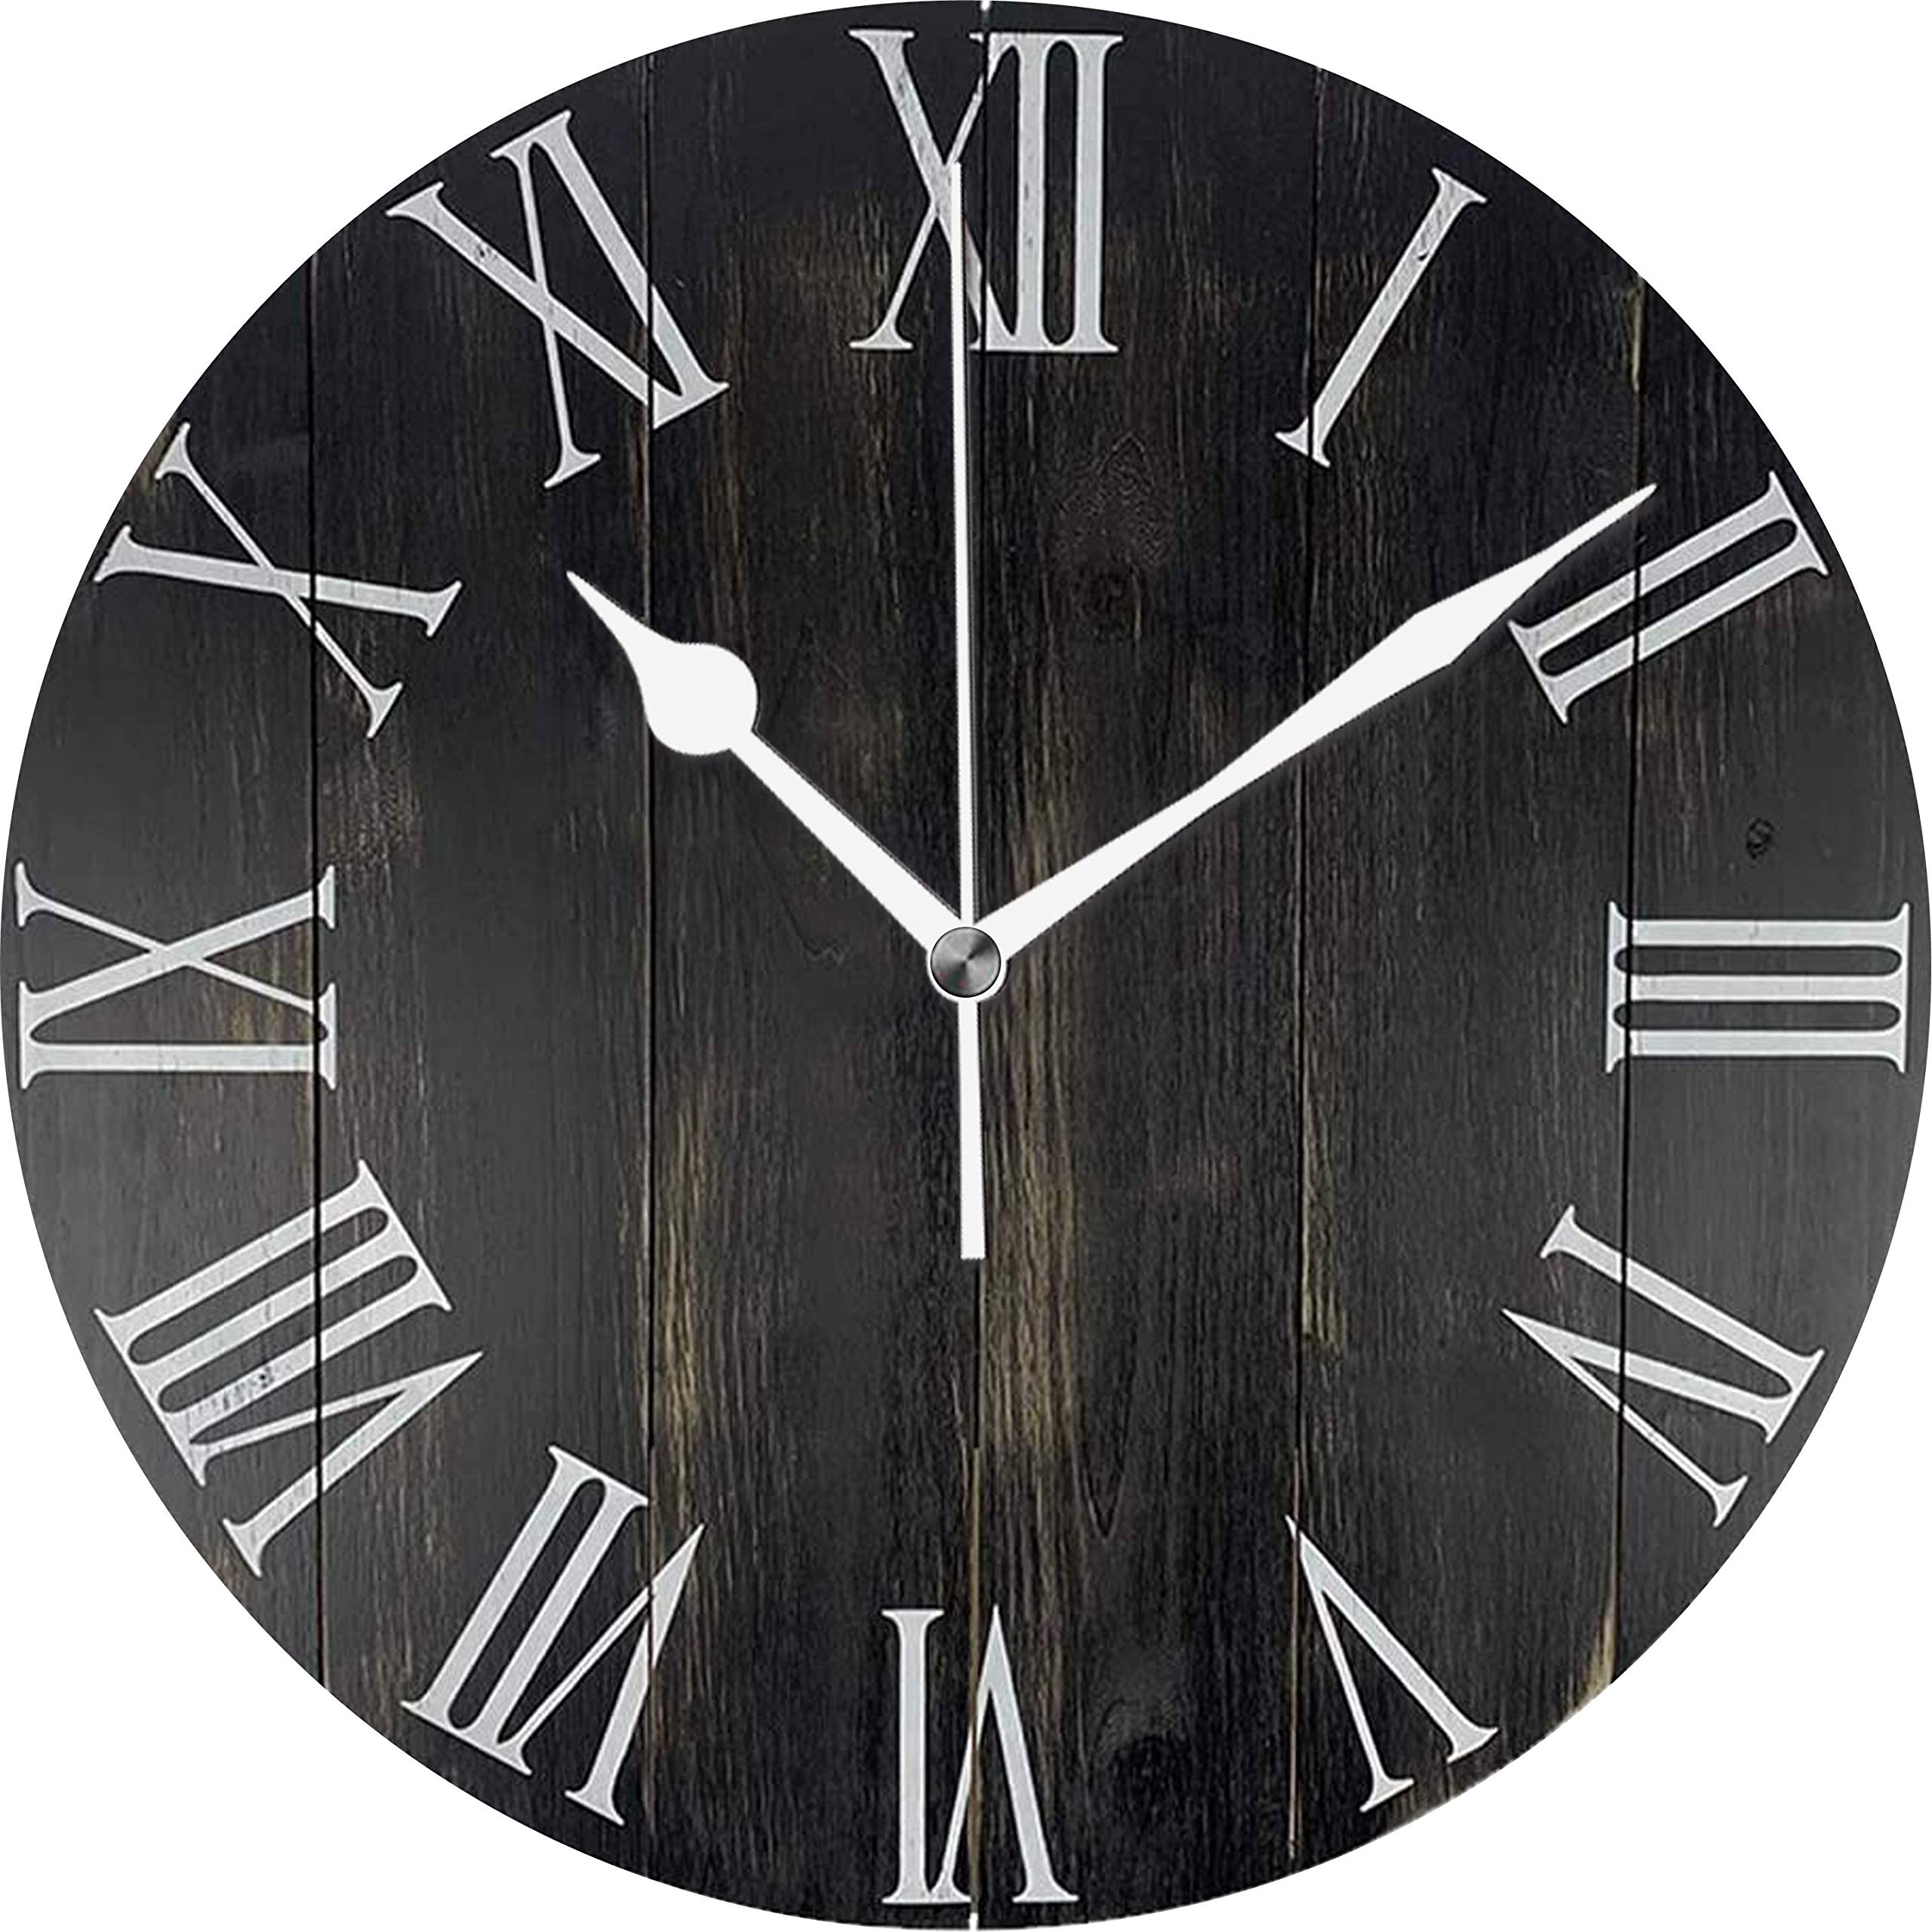 LANEABUY Rustic Wooden Farmhouse Wall Clock Black 14 Inch Silent Non Ticking Battery Operated Home Decor Wall Clocks for Living Room, Bedroom, Kitchen 14IN Rustic Black